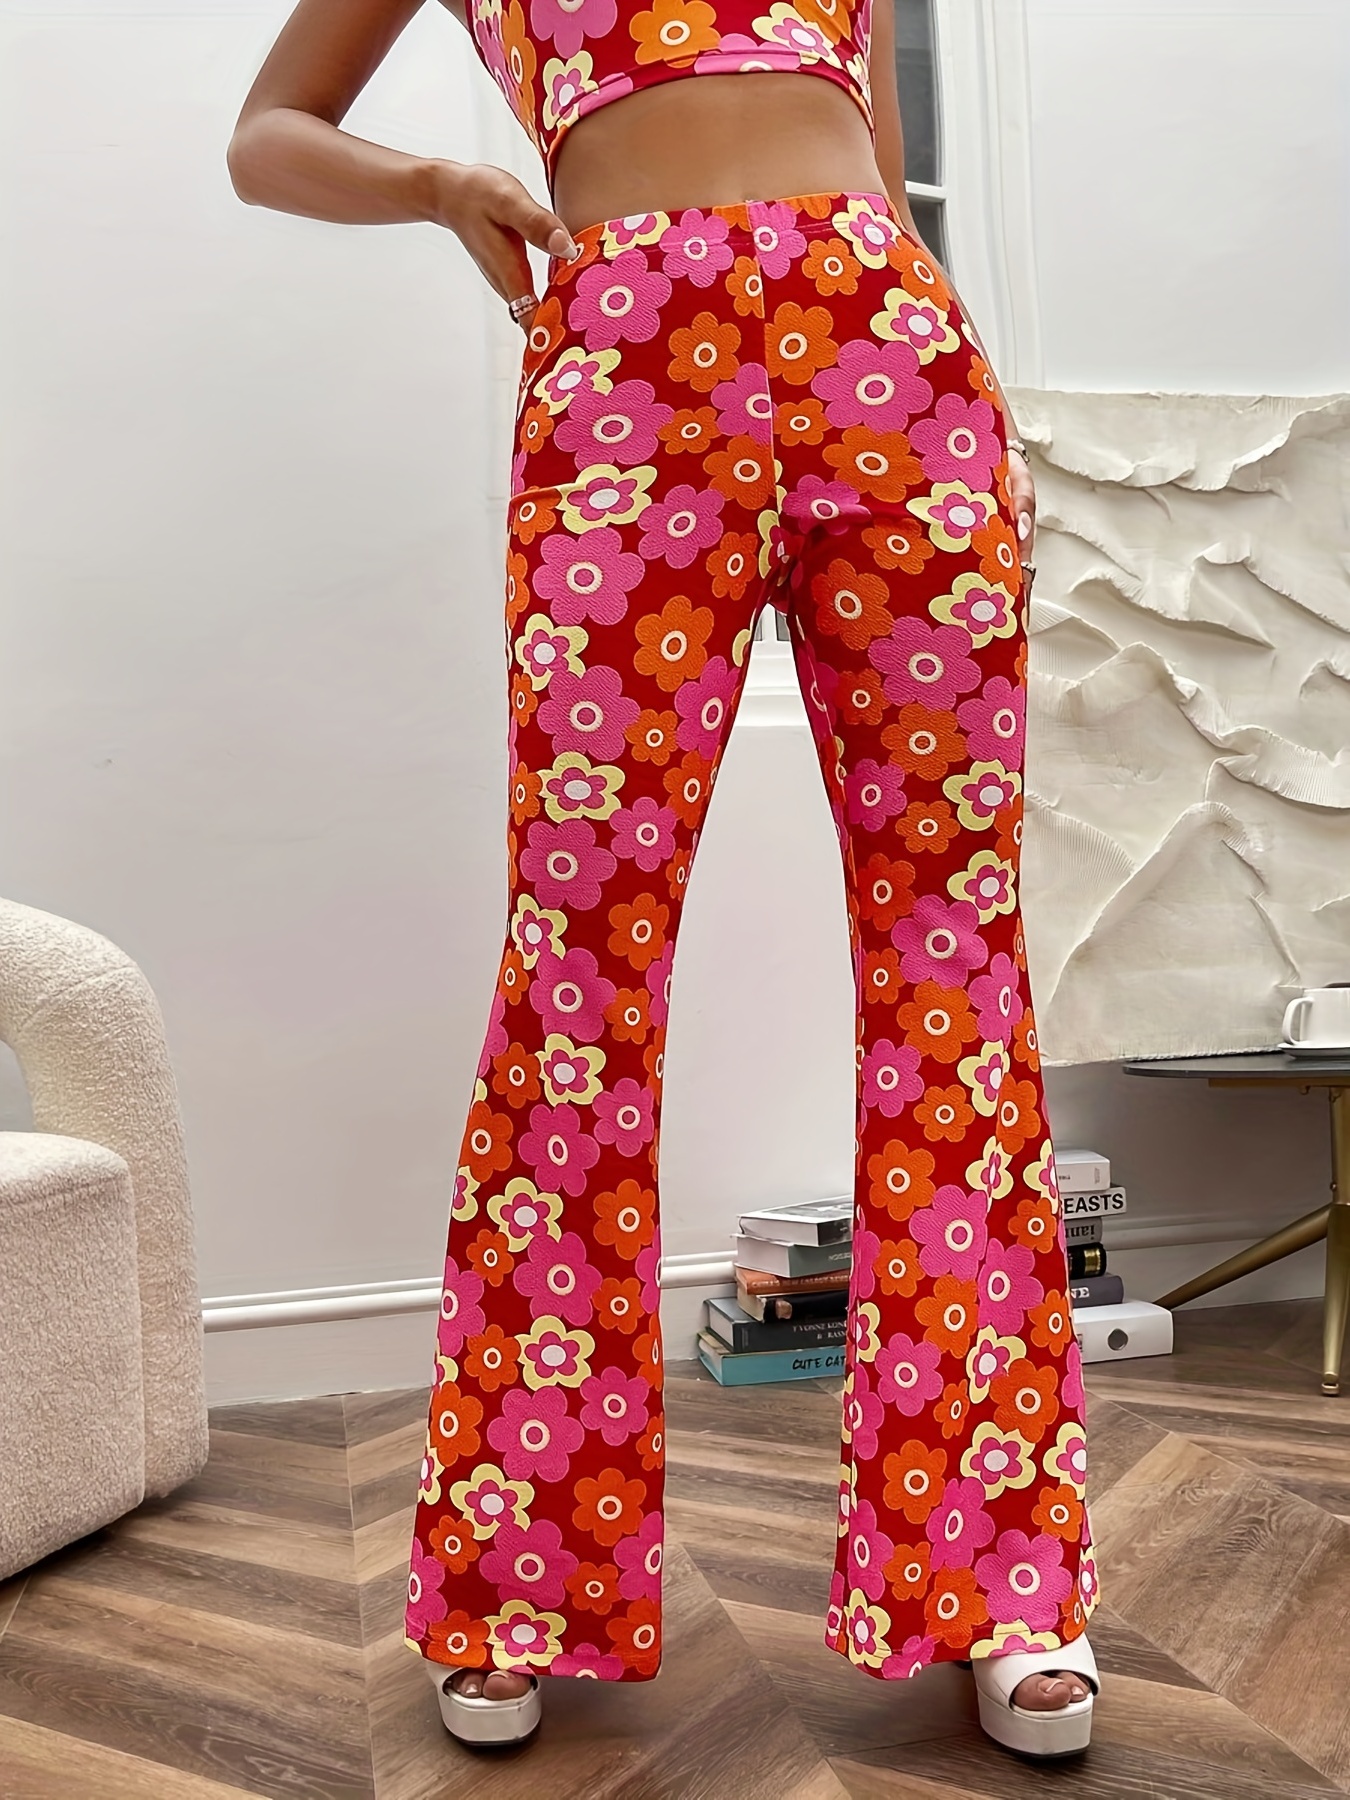 FLARE PANTS WITH ELASTIC WAIST T 602